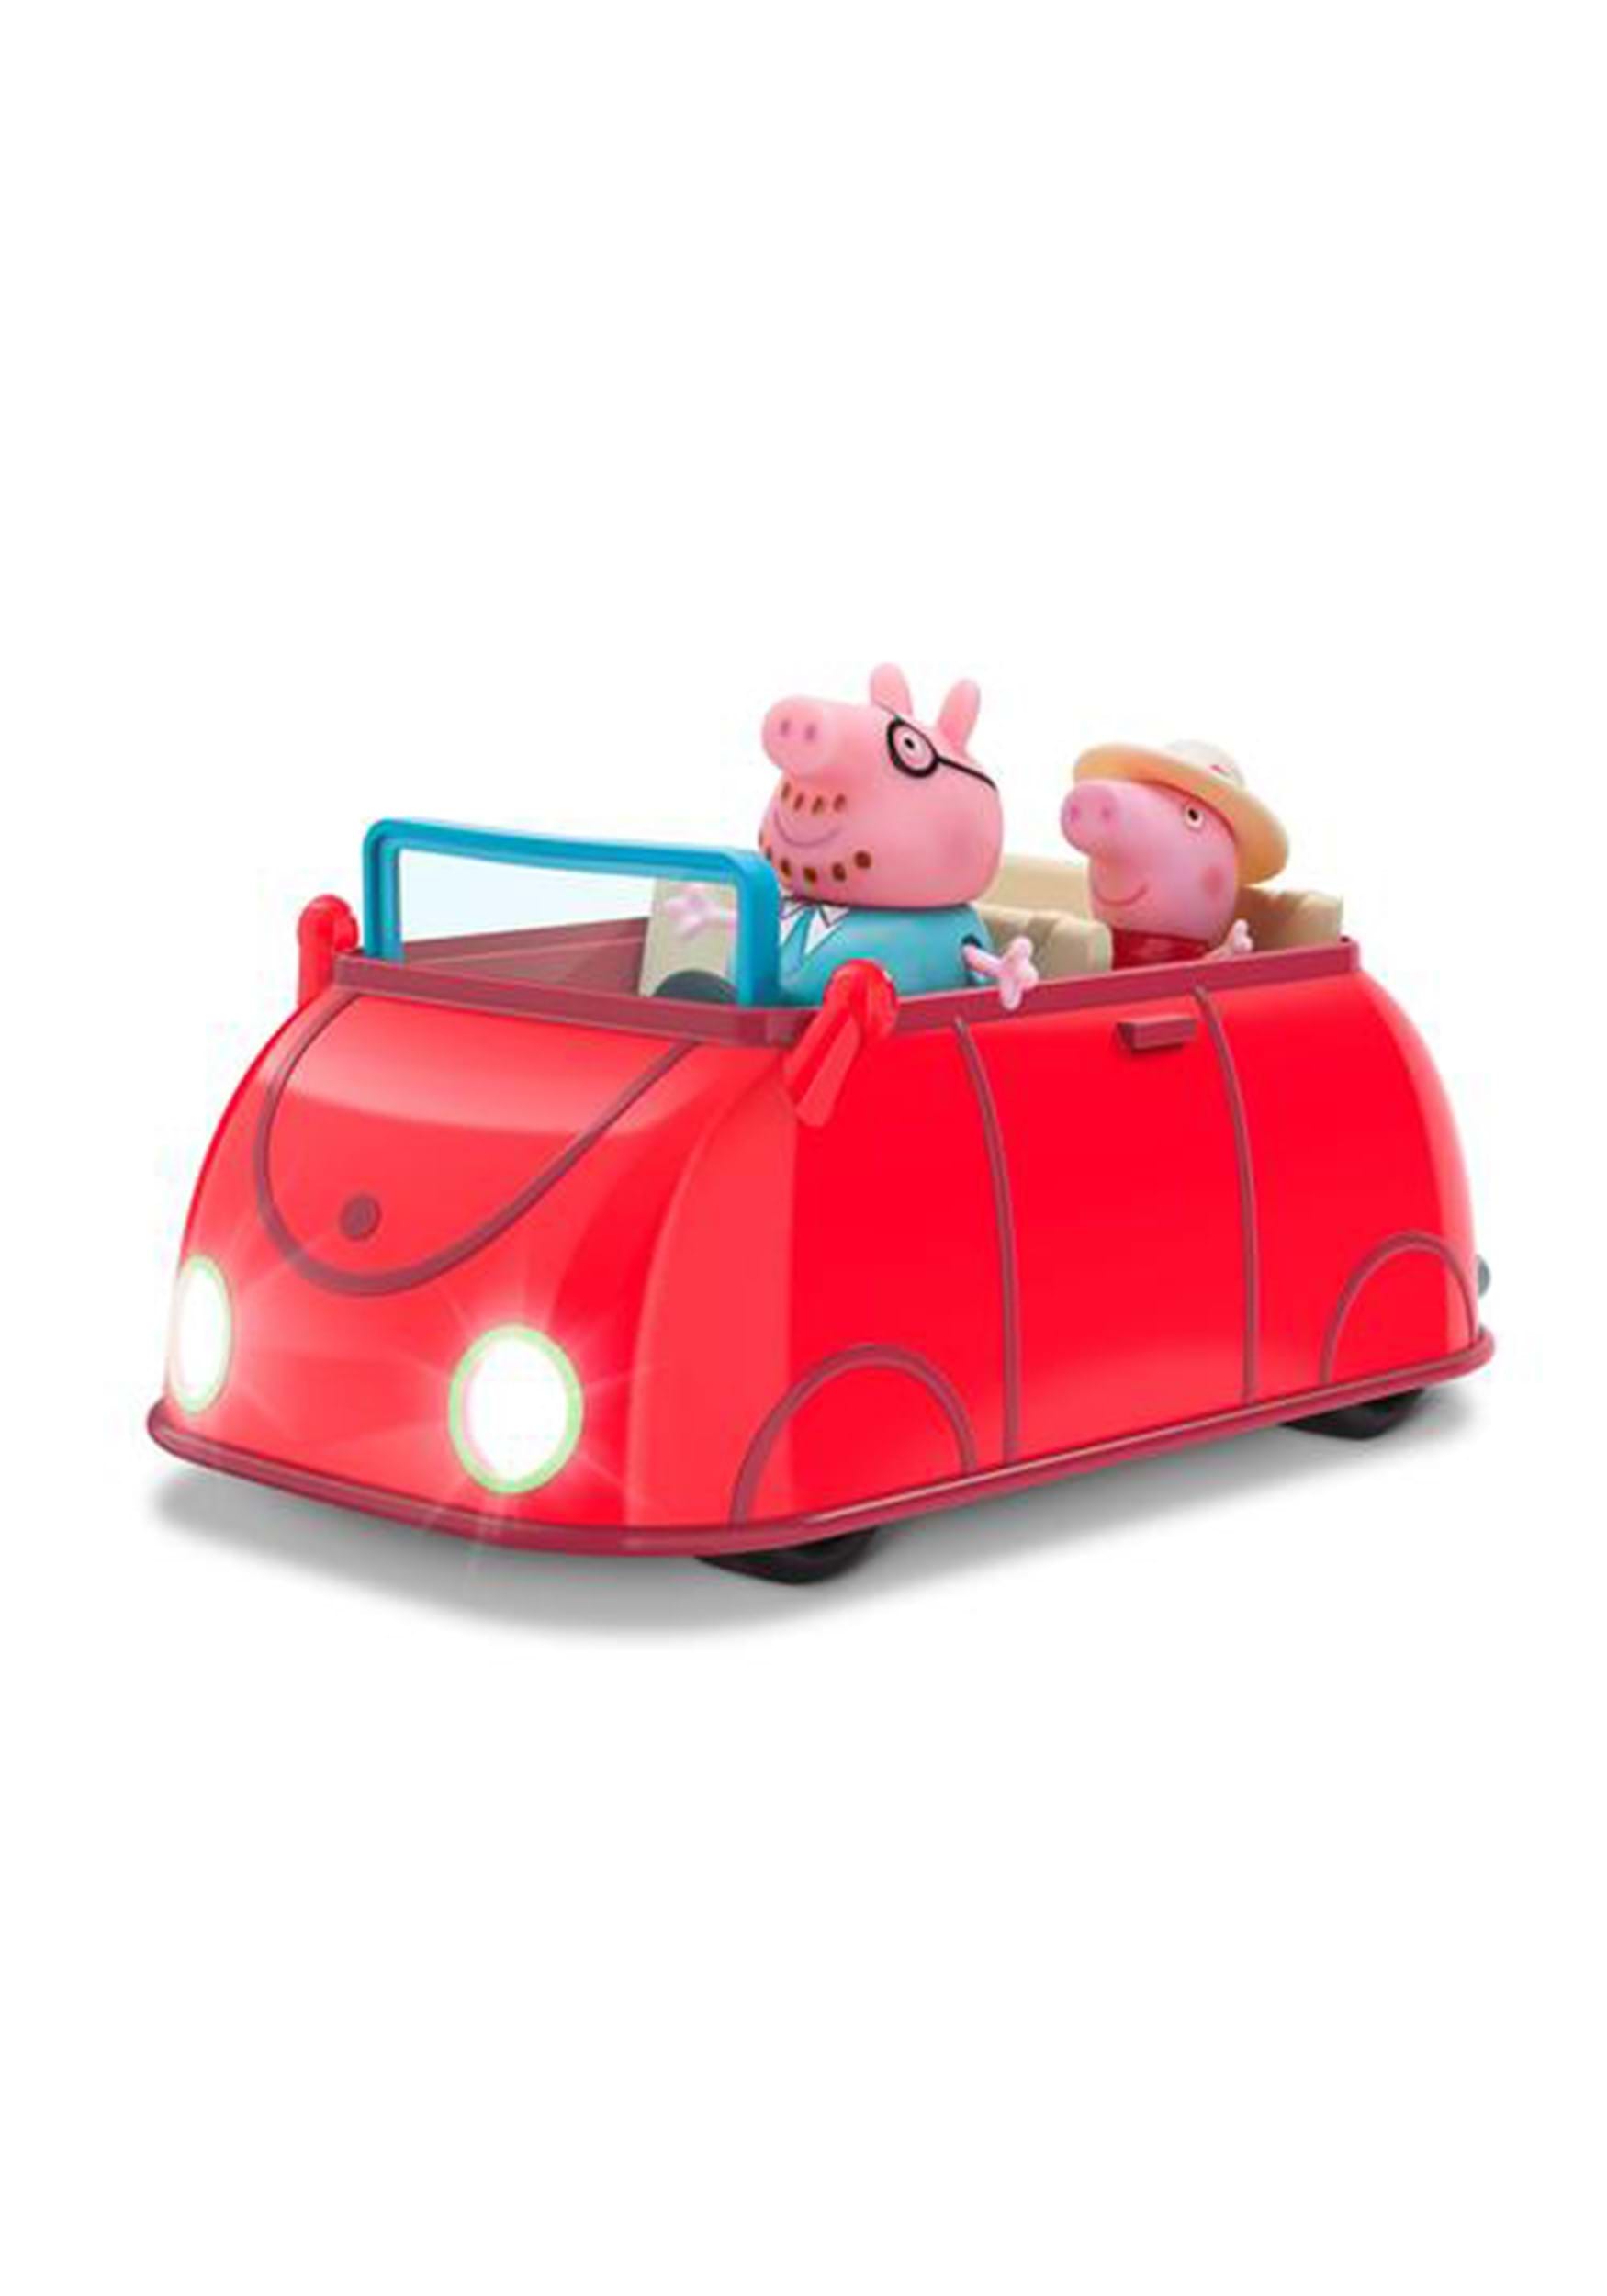 Deluxe Peppa Pig Sounds and Lights Vehicle